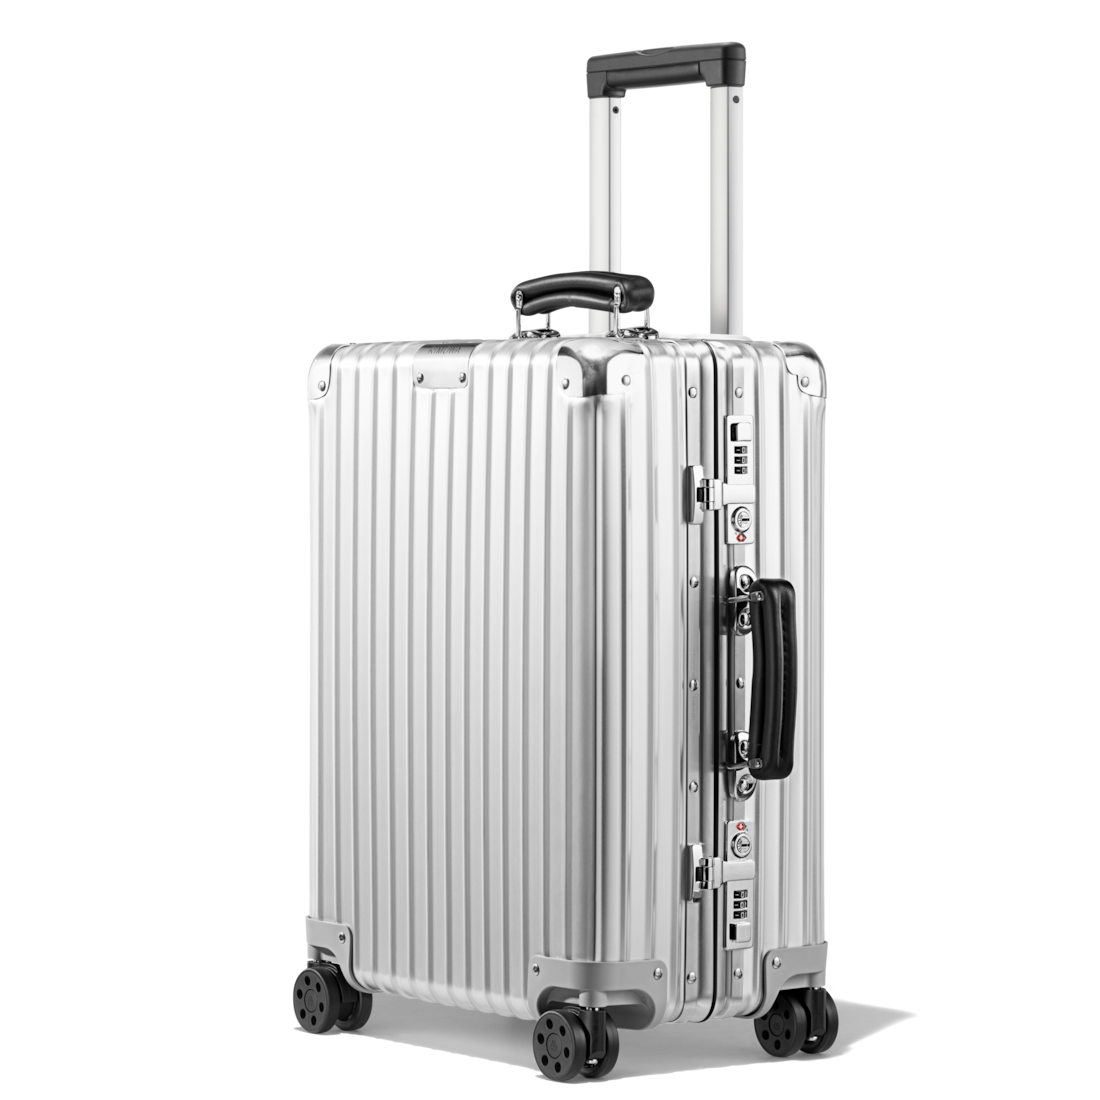 rimowa cabin carry on